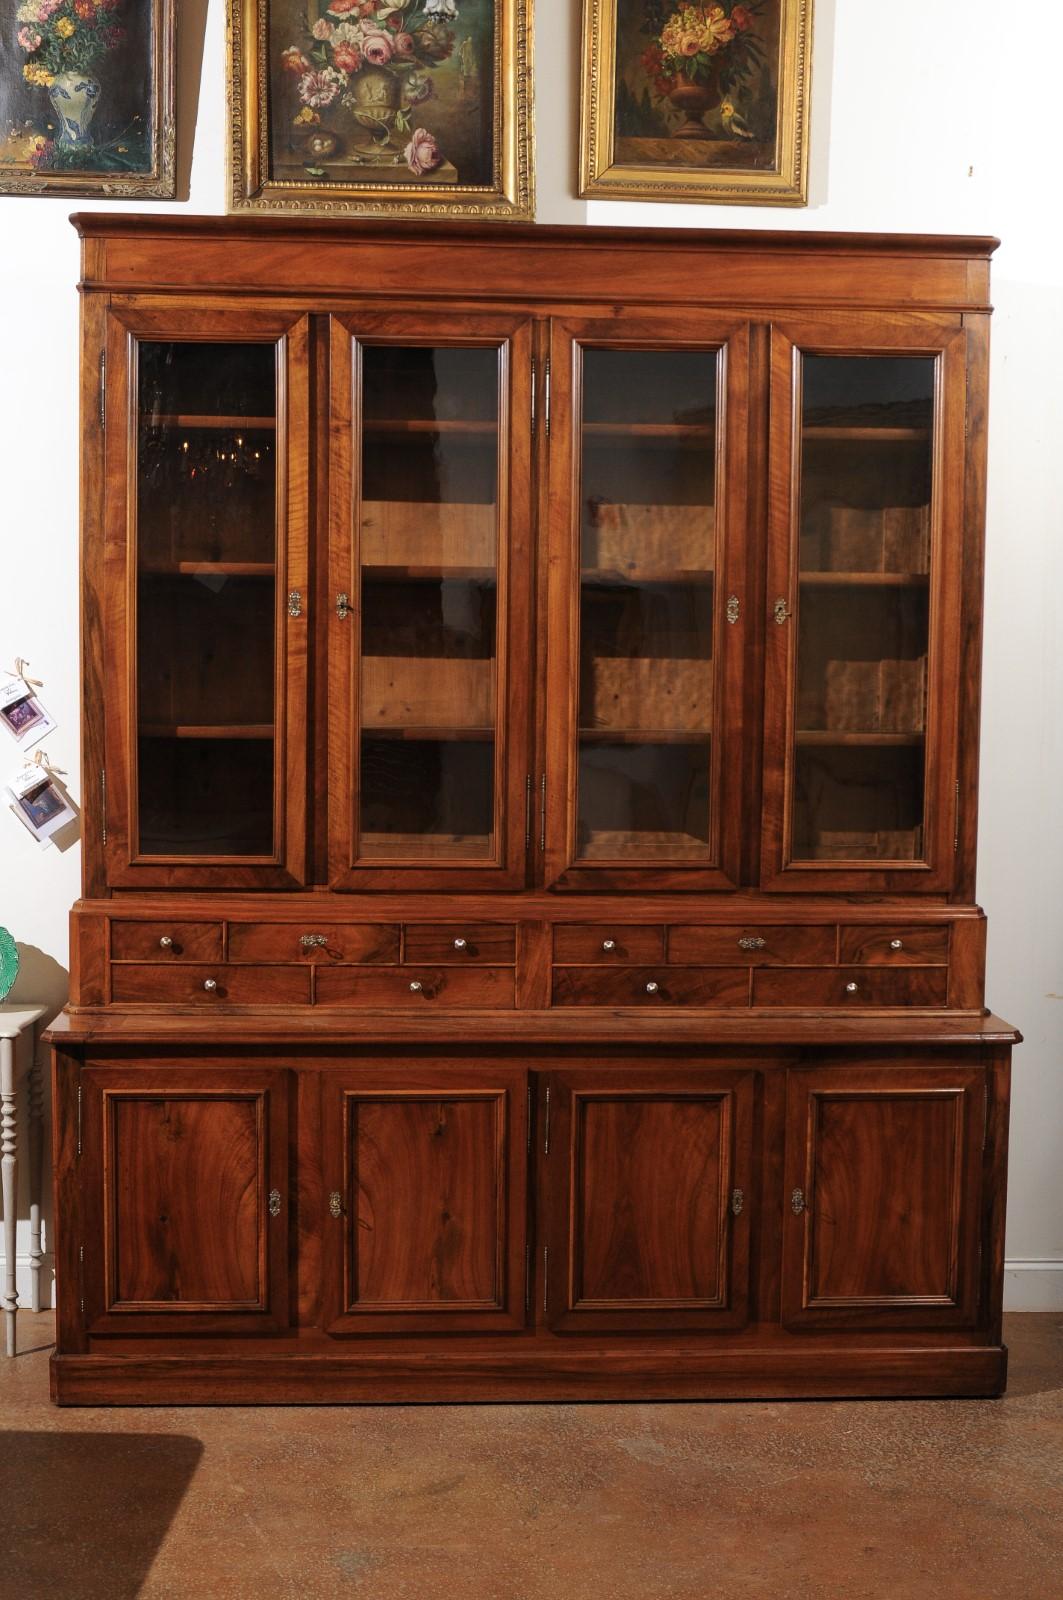 A French Louis-Philippe style walnut bookcase from the late 19th century with glass doors, drawers and wooden doors. This French two-part walnut bibliothèque features a molded cornice sitting above four glass doors opening to reveal adjustable